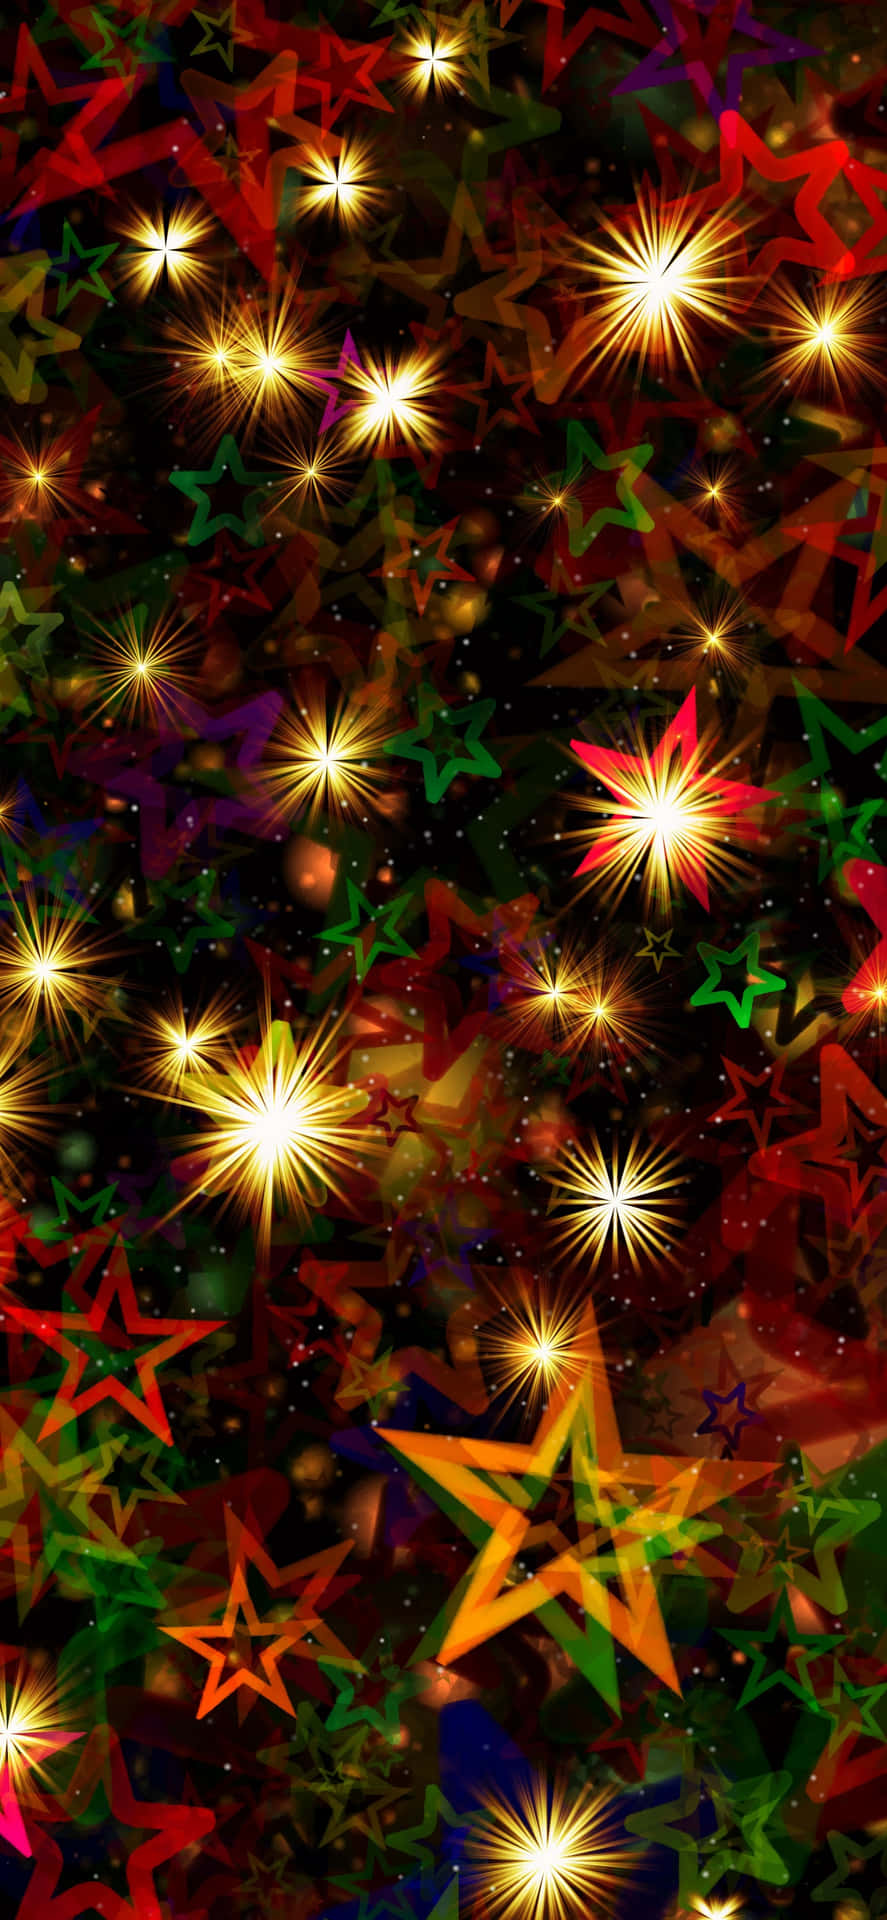 Illuminate Your Home and Holiday Celebrations with a Christmas Star Wallpaper